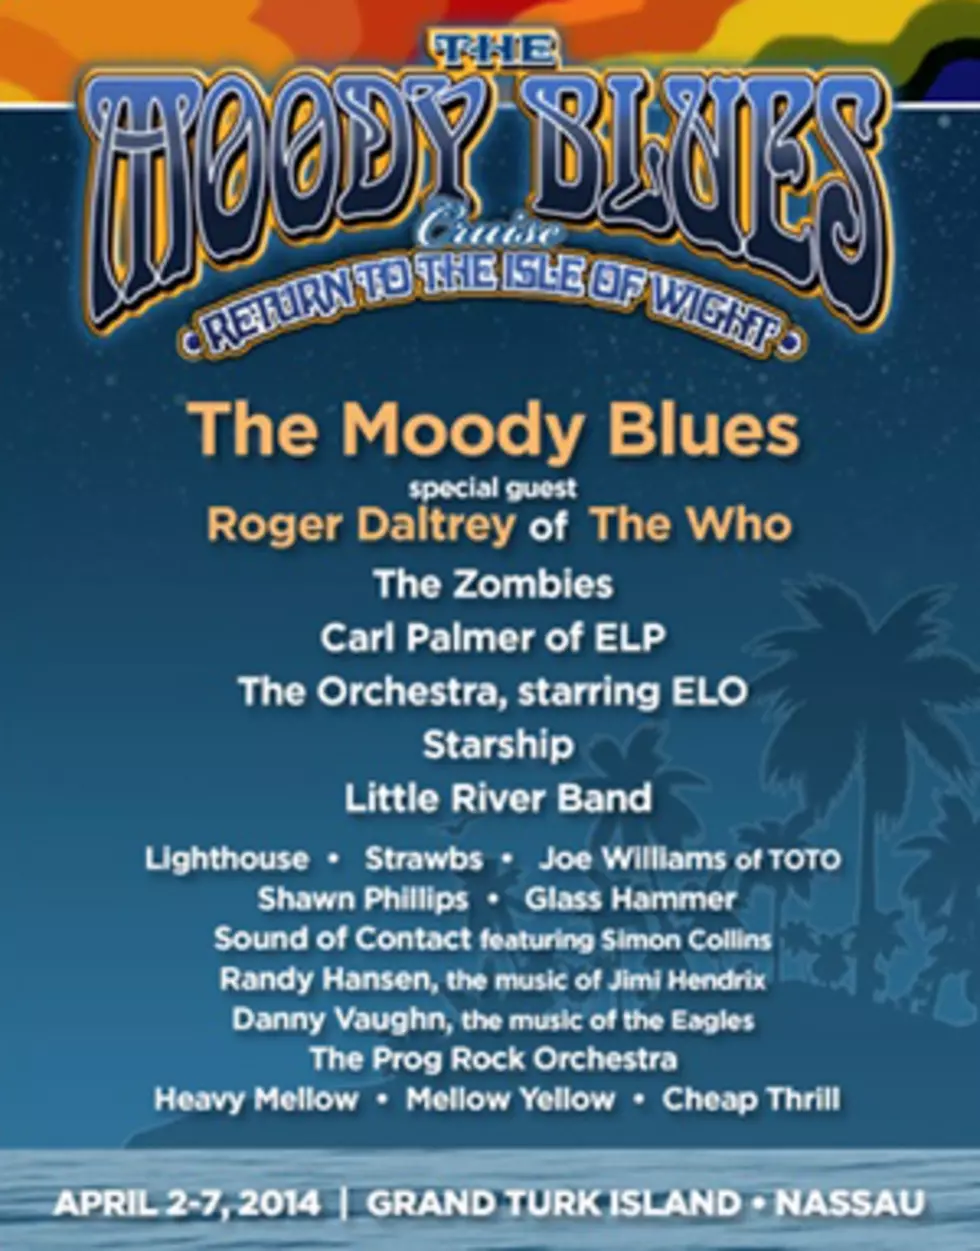 Moody Blues Cruise II to Feature Roger Daltrey